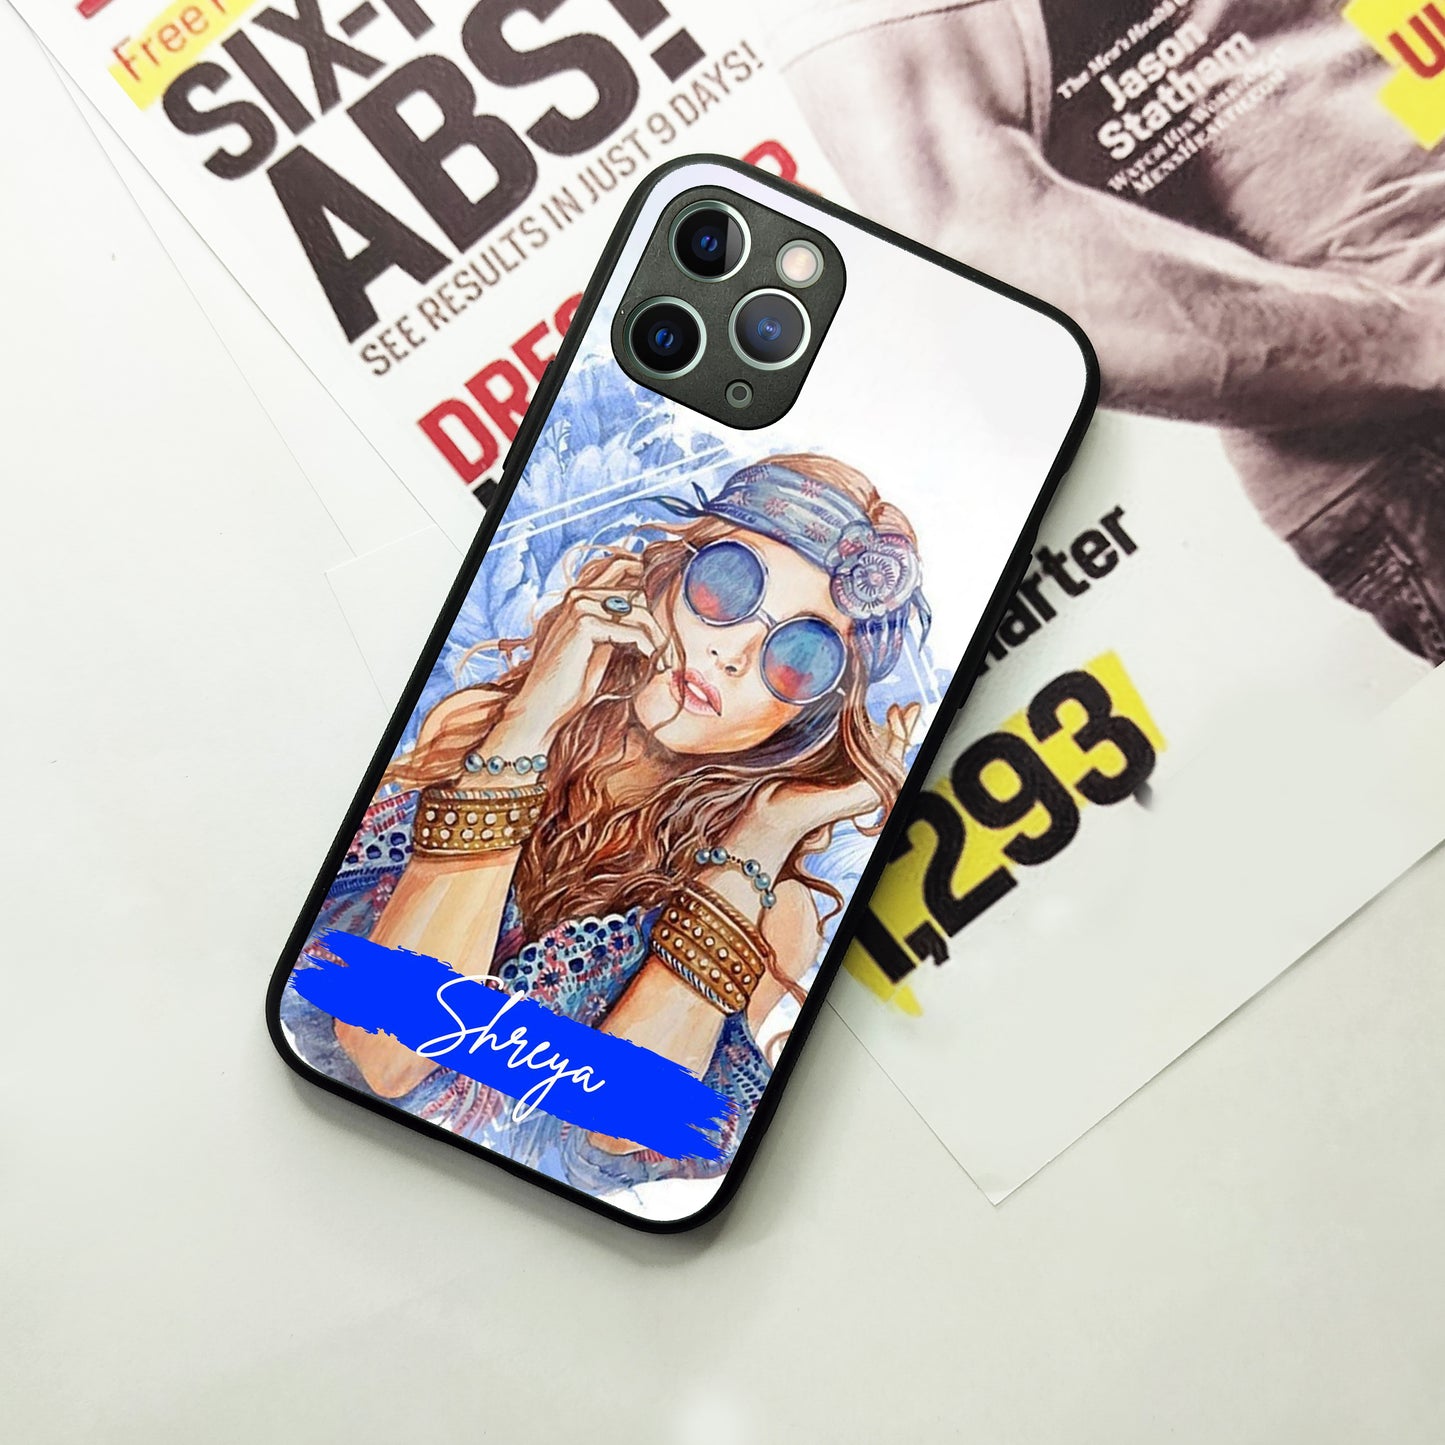 Bindass Babe Customize Glass Case Cover For iPhone